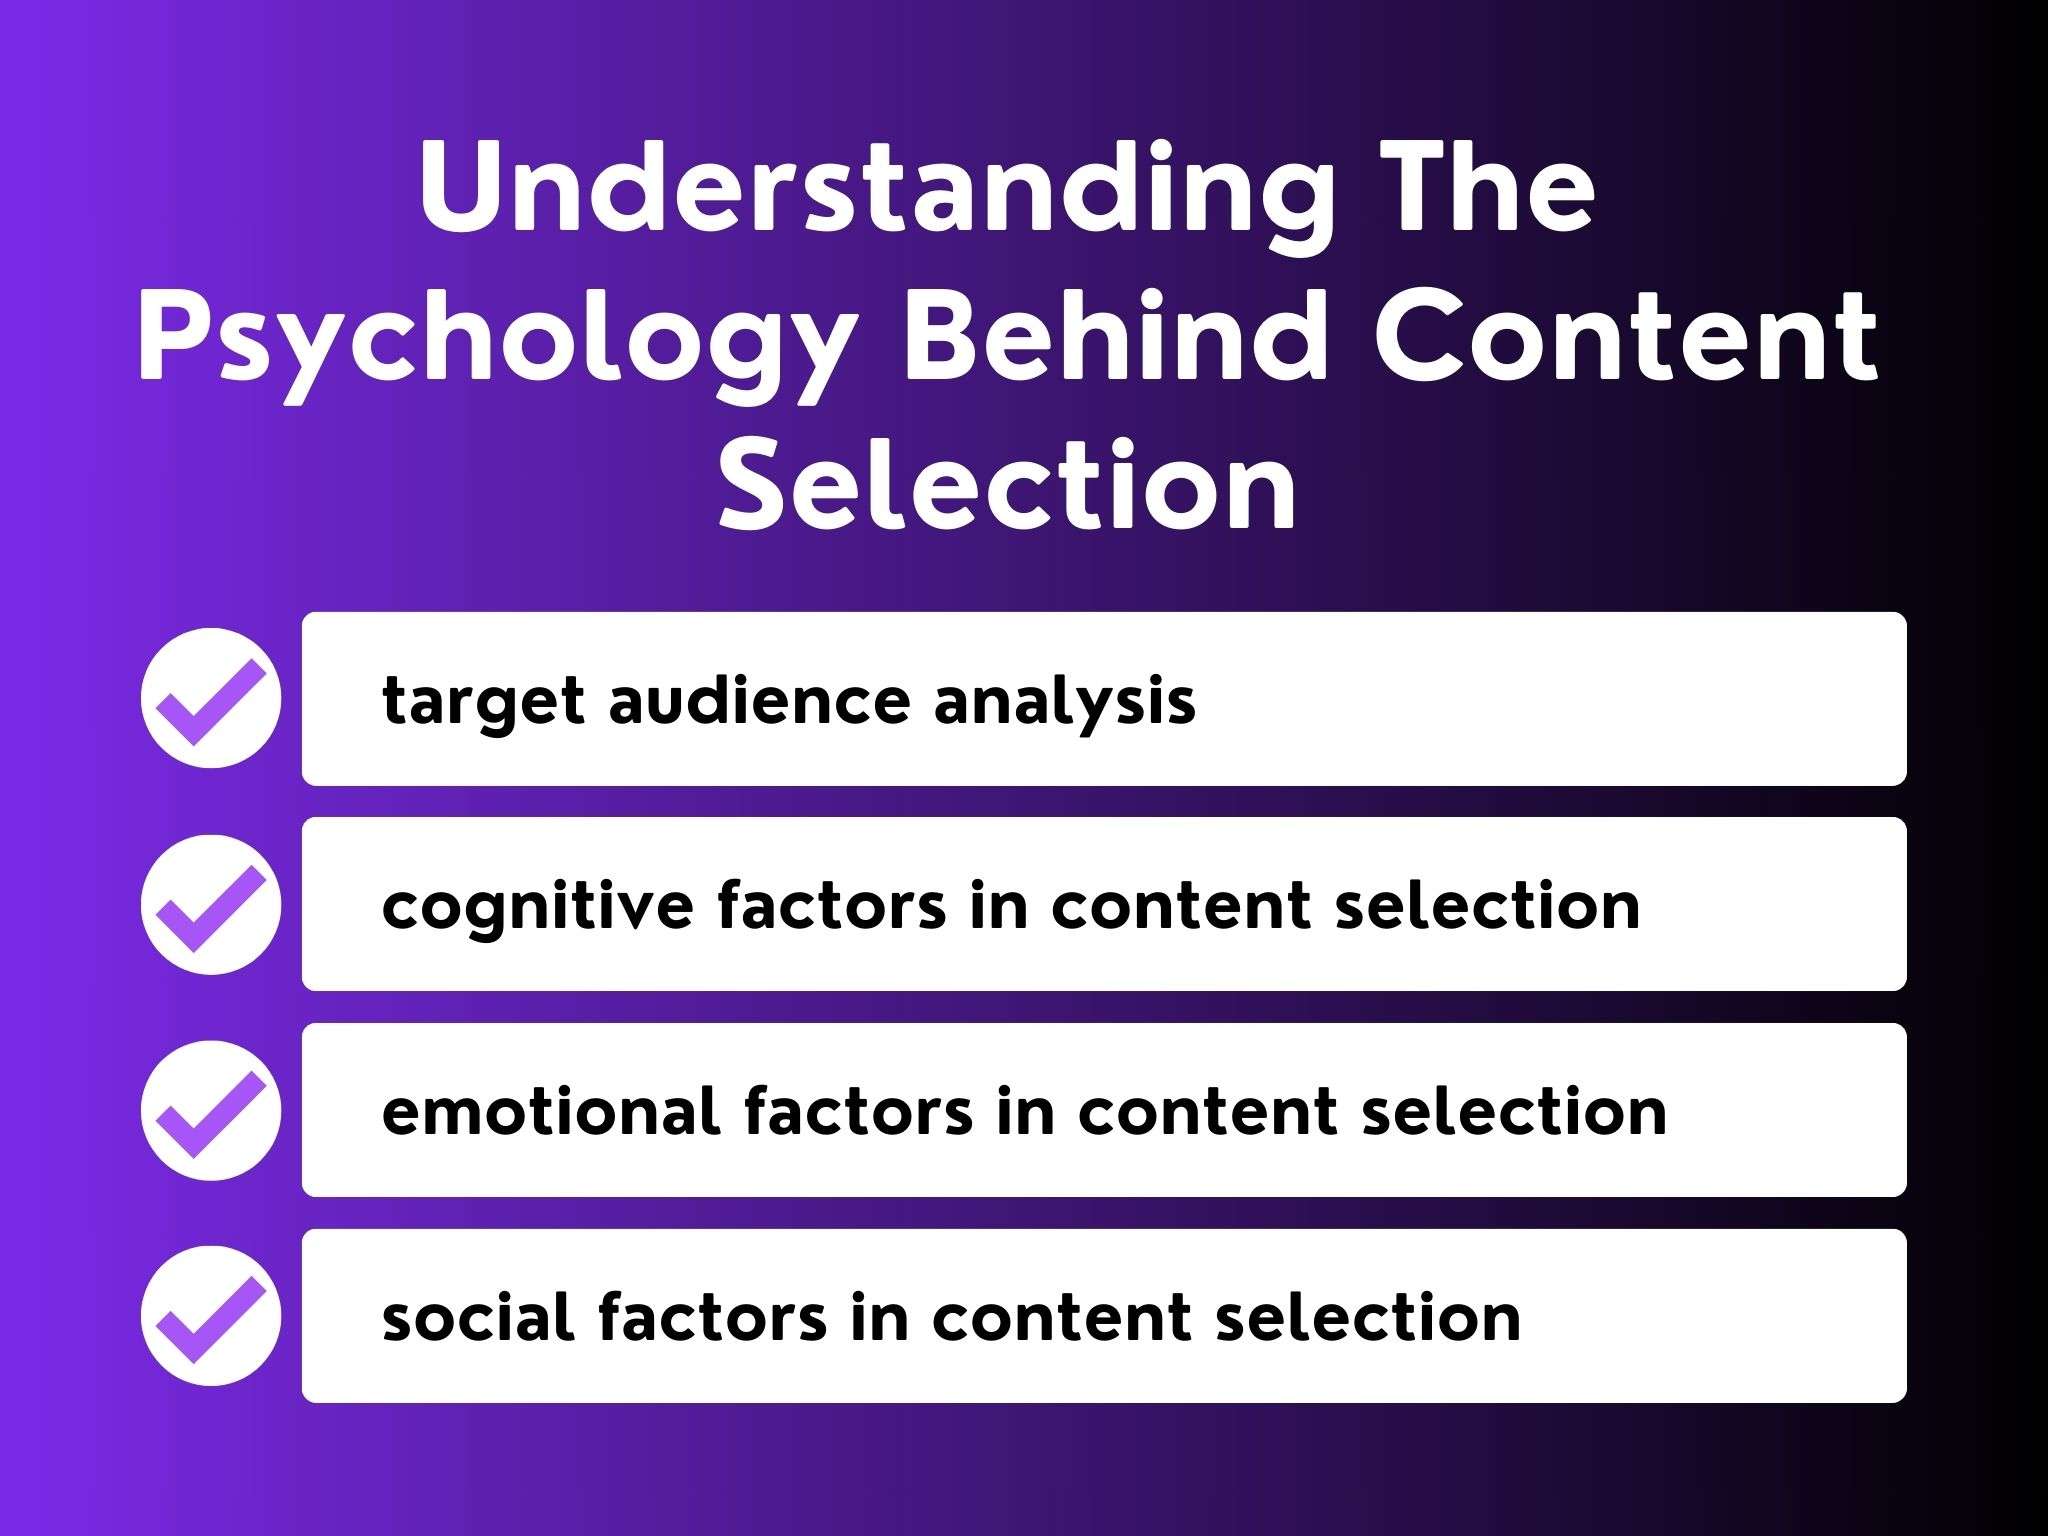 Understanding the psychology behind content selection